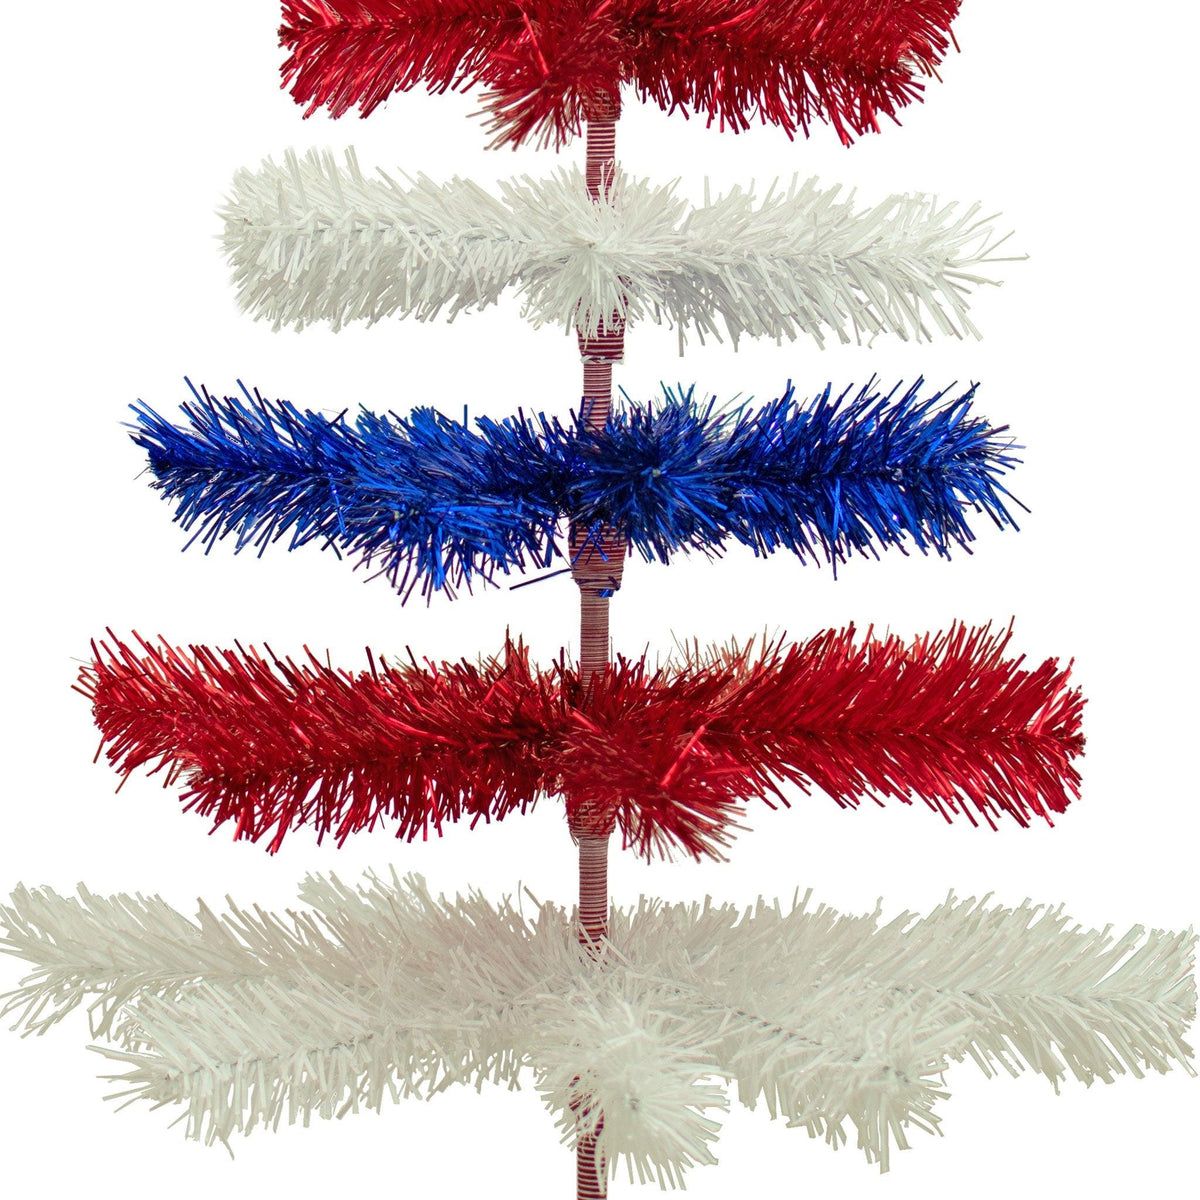 48in tall Red, White, and Blue Layered Tinsel Christmas Trees made by hand in the USA.  Decorate for the holidays with retro 4th of July-themed Trees and start creating your centerpiece now.  Shop for more at leedisplay.com